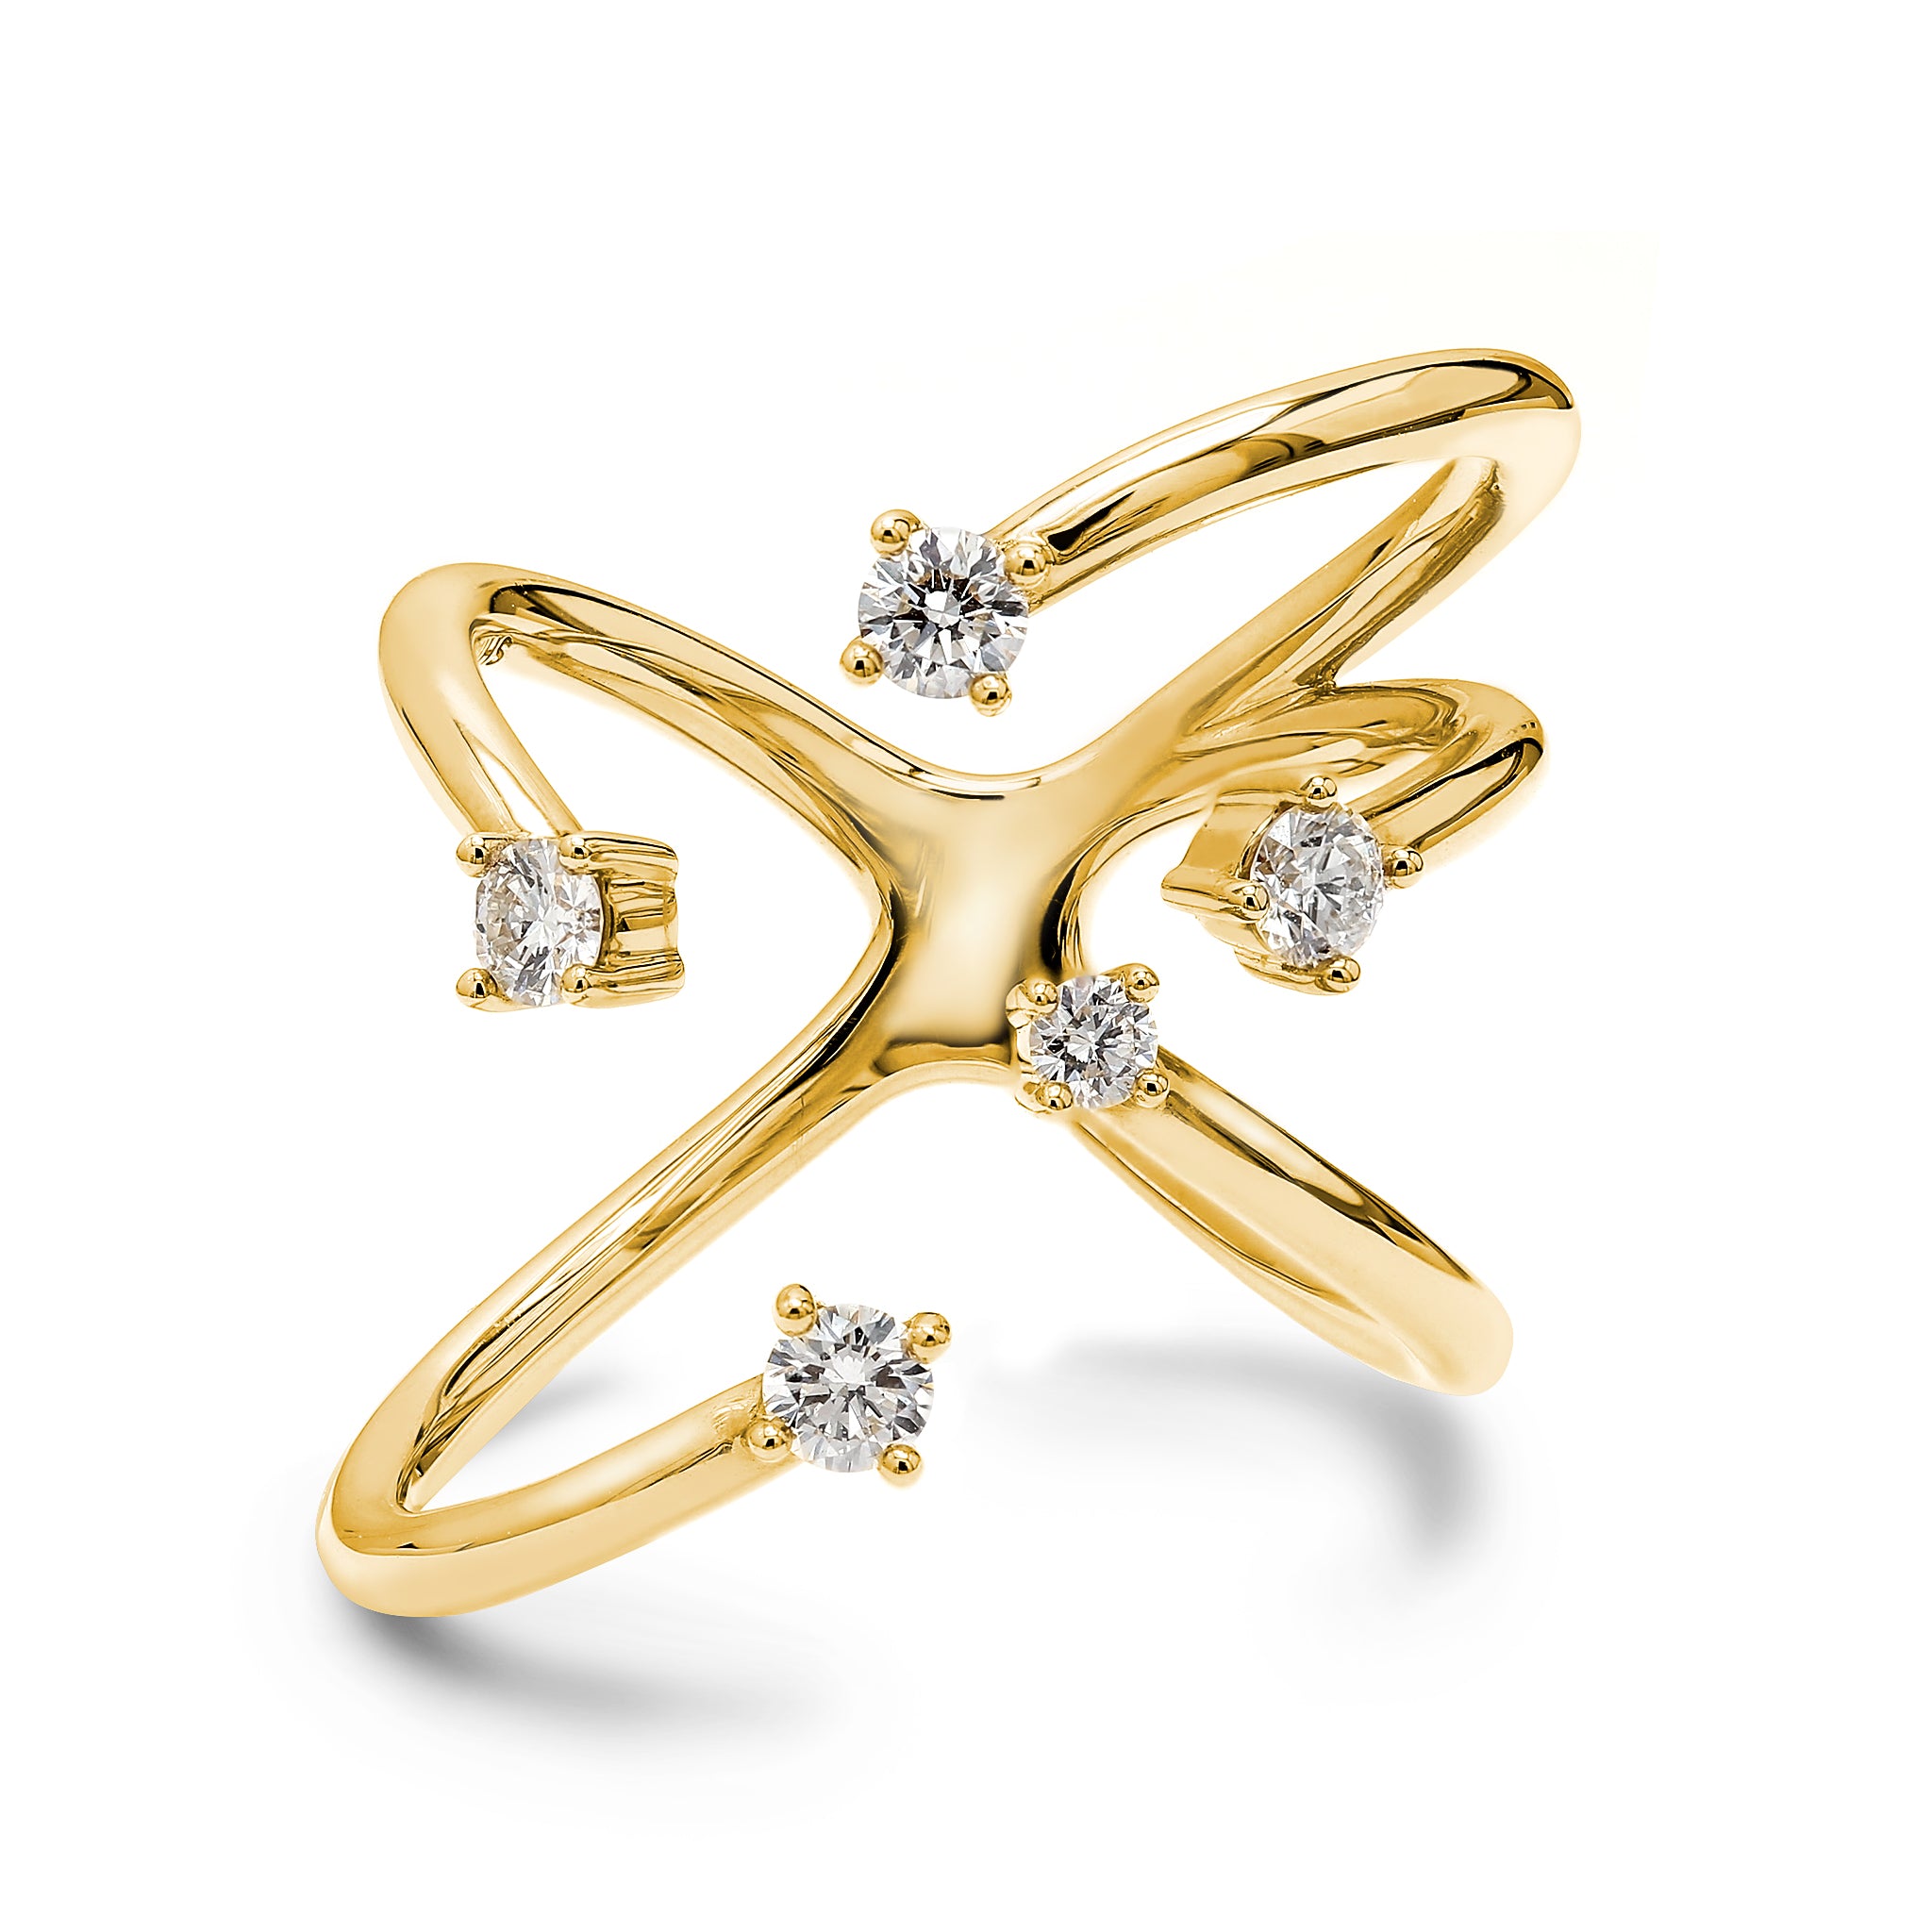 Shimansky - Southern Cross Large Diamond Ring Crafted in 18K Yellow Gold